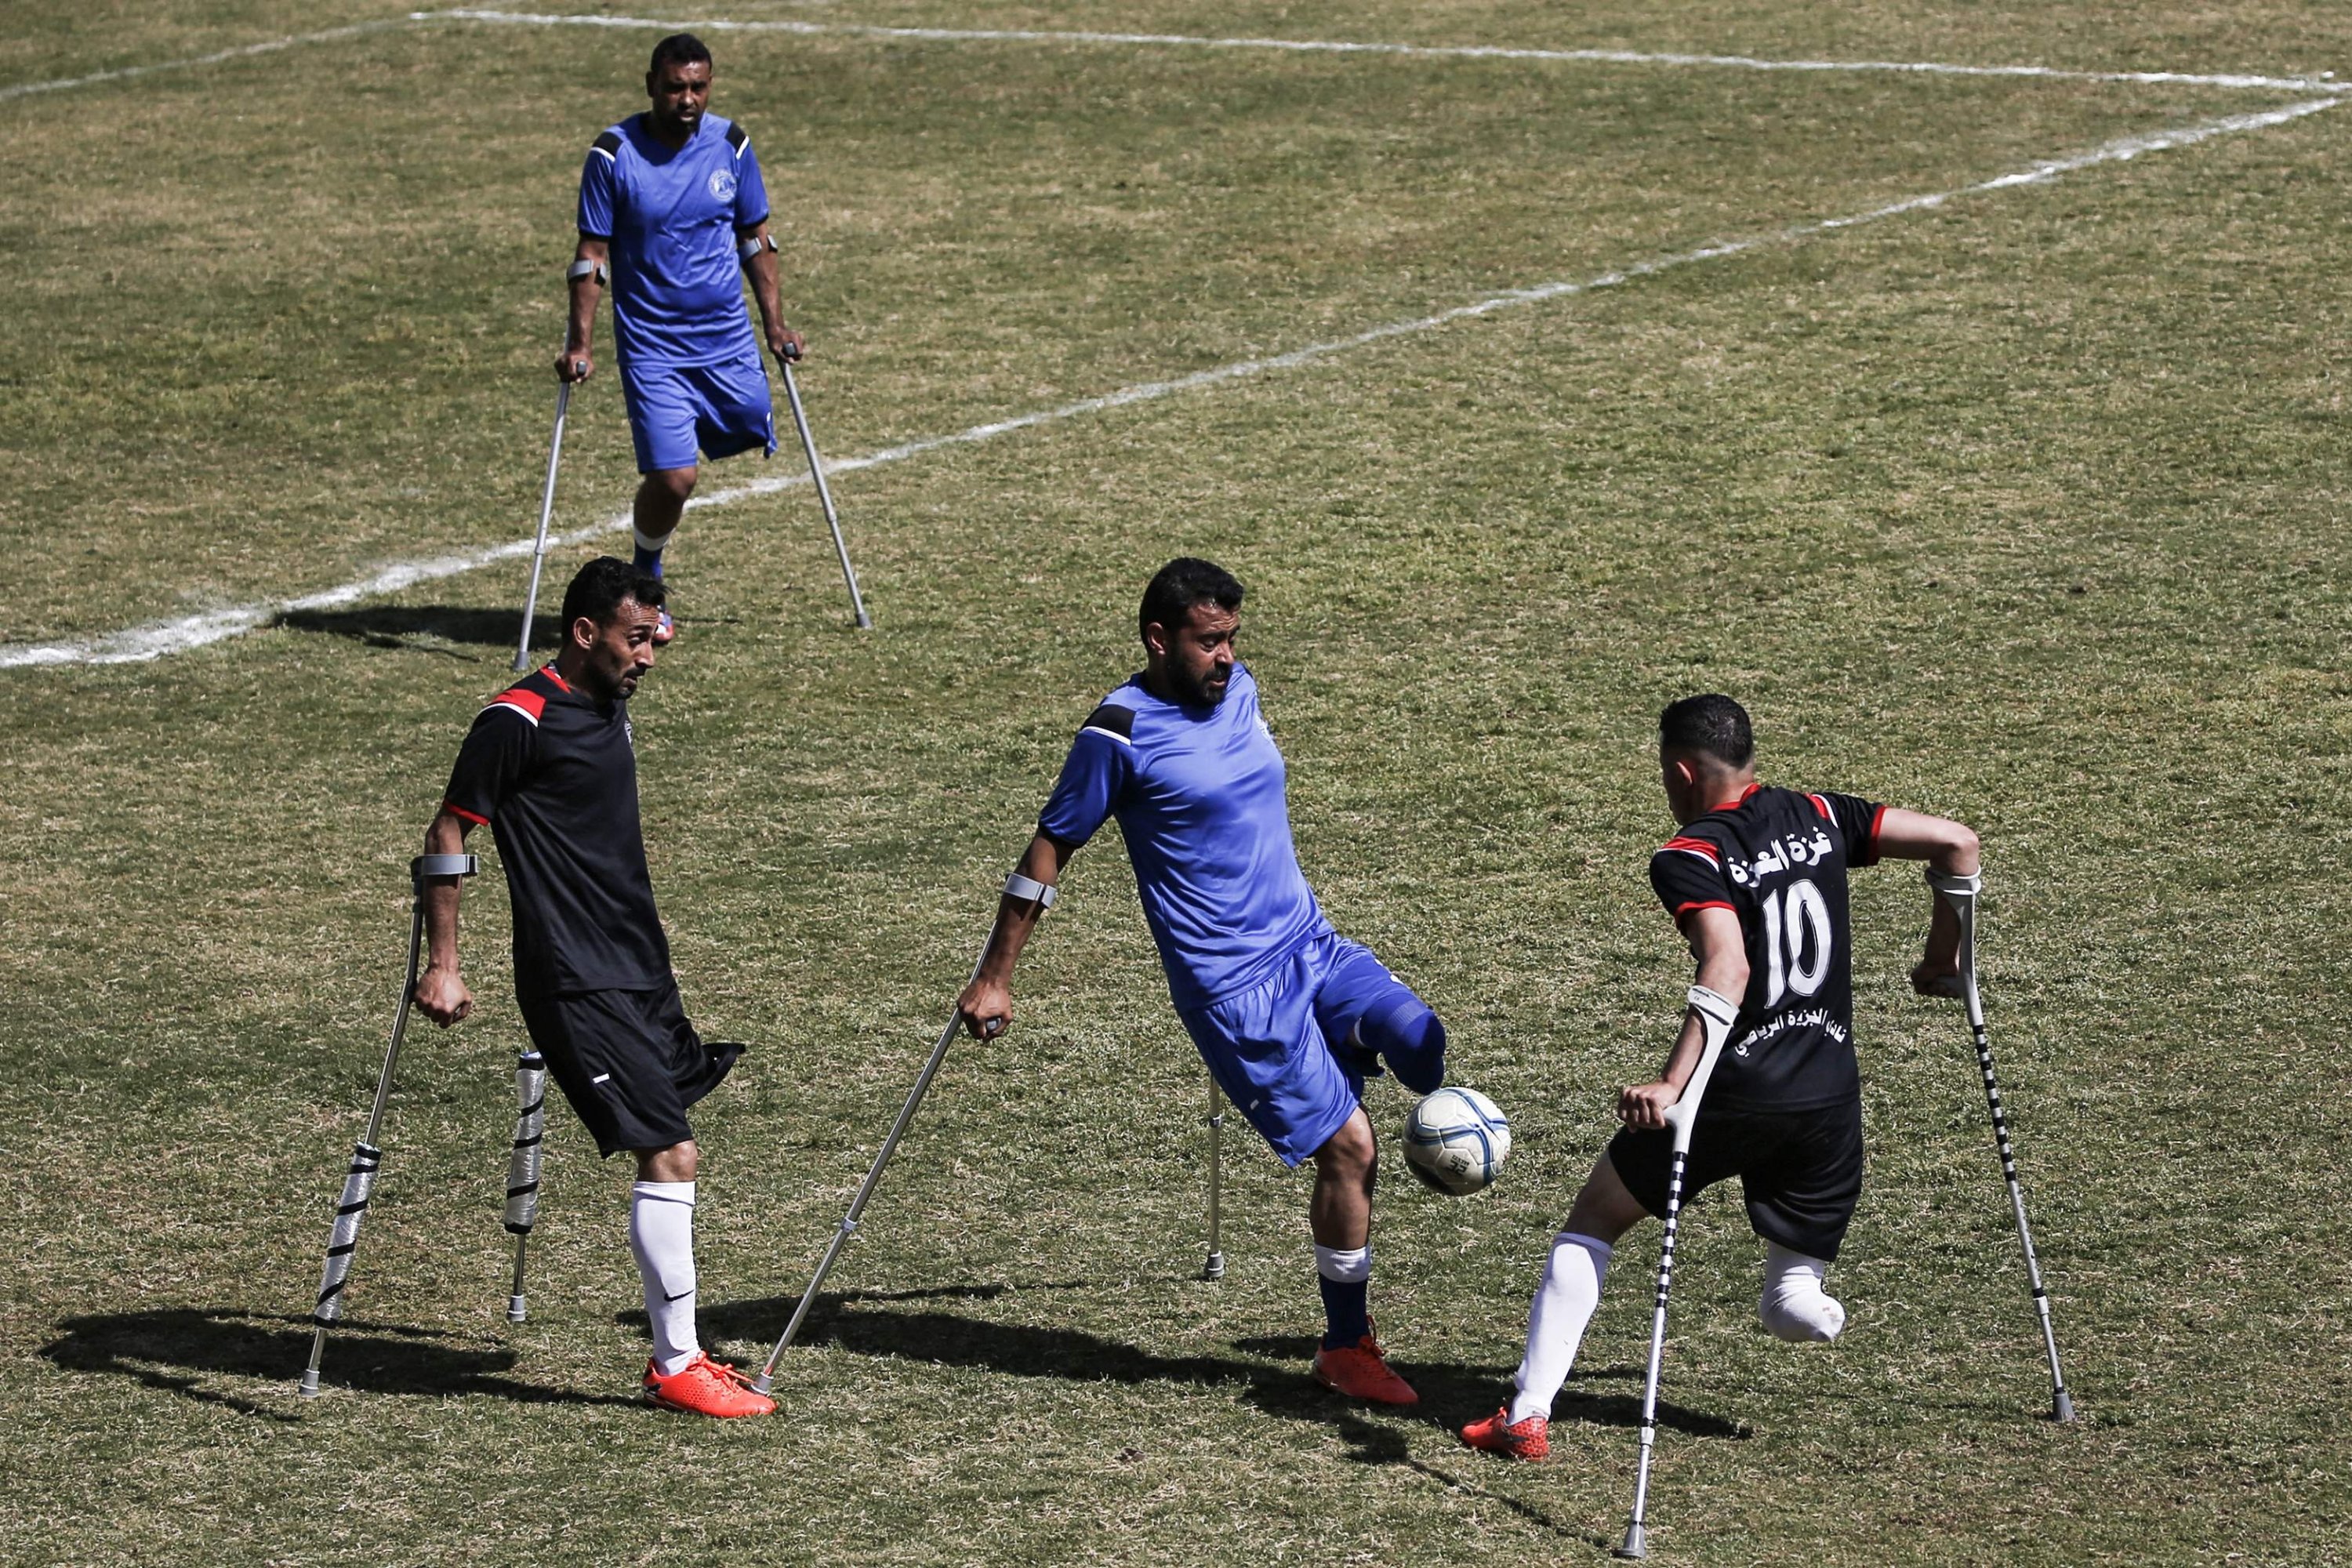 Palestinian players vie for the ball during the final of a local football championship for amputees, Gaza City, March 18, 2021. (AFP Photo)